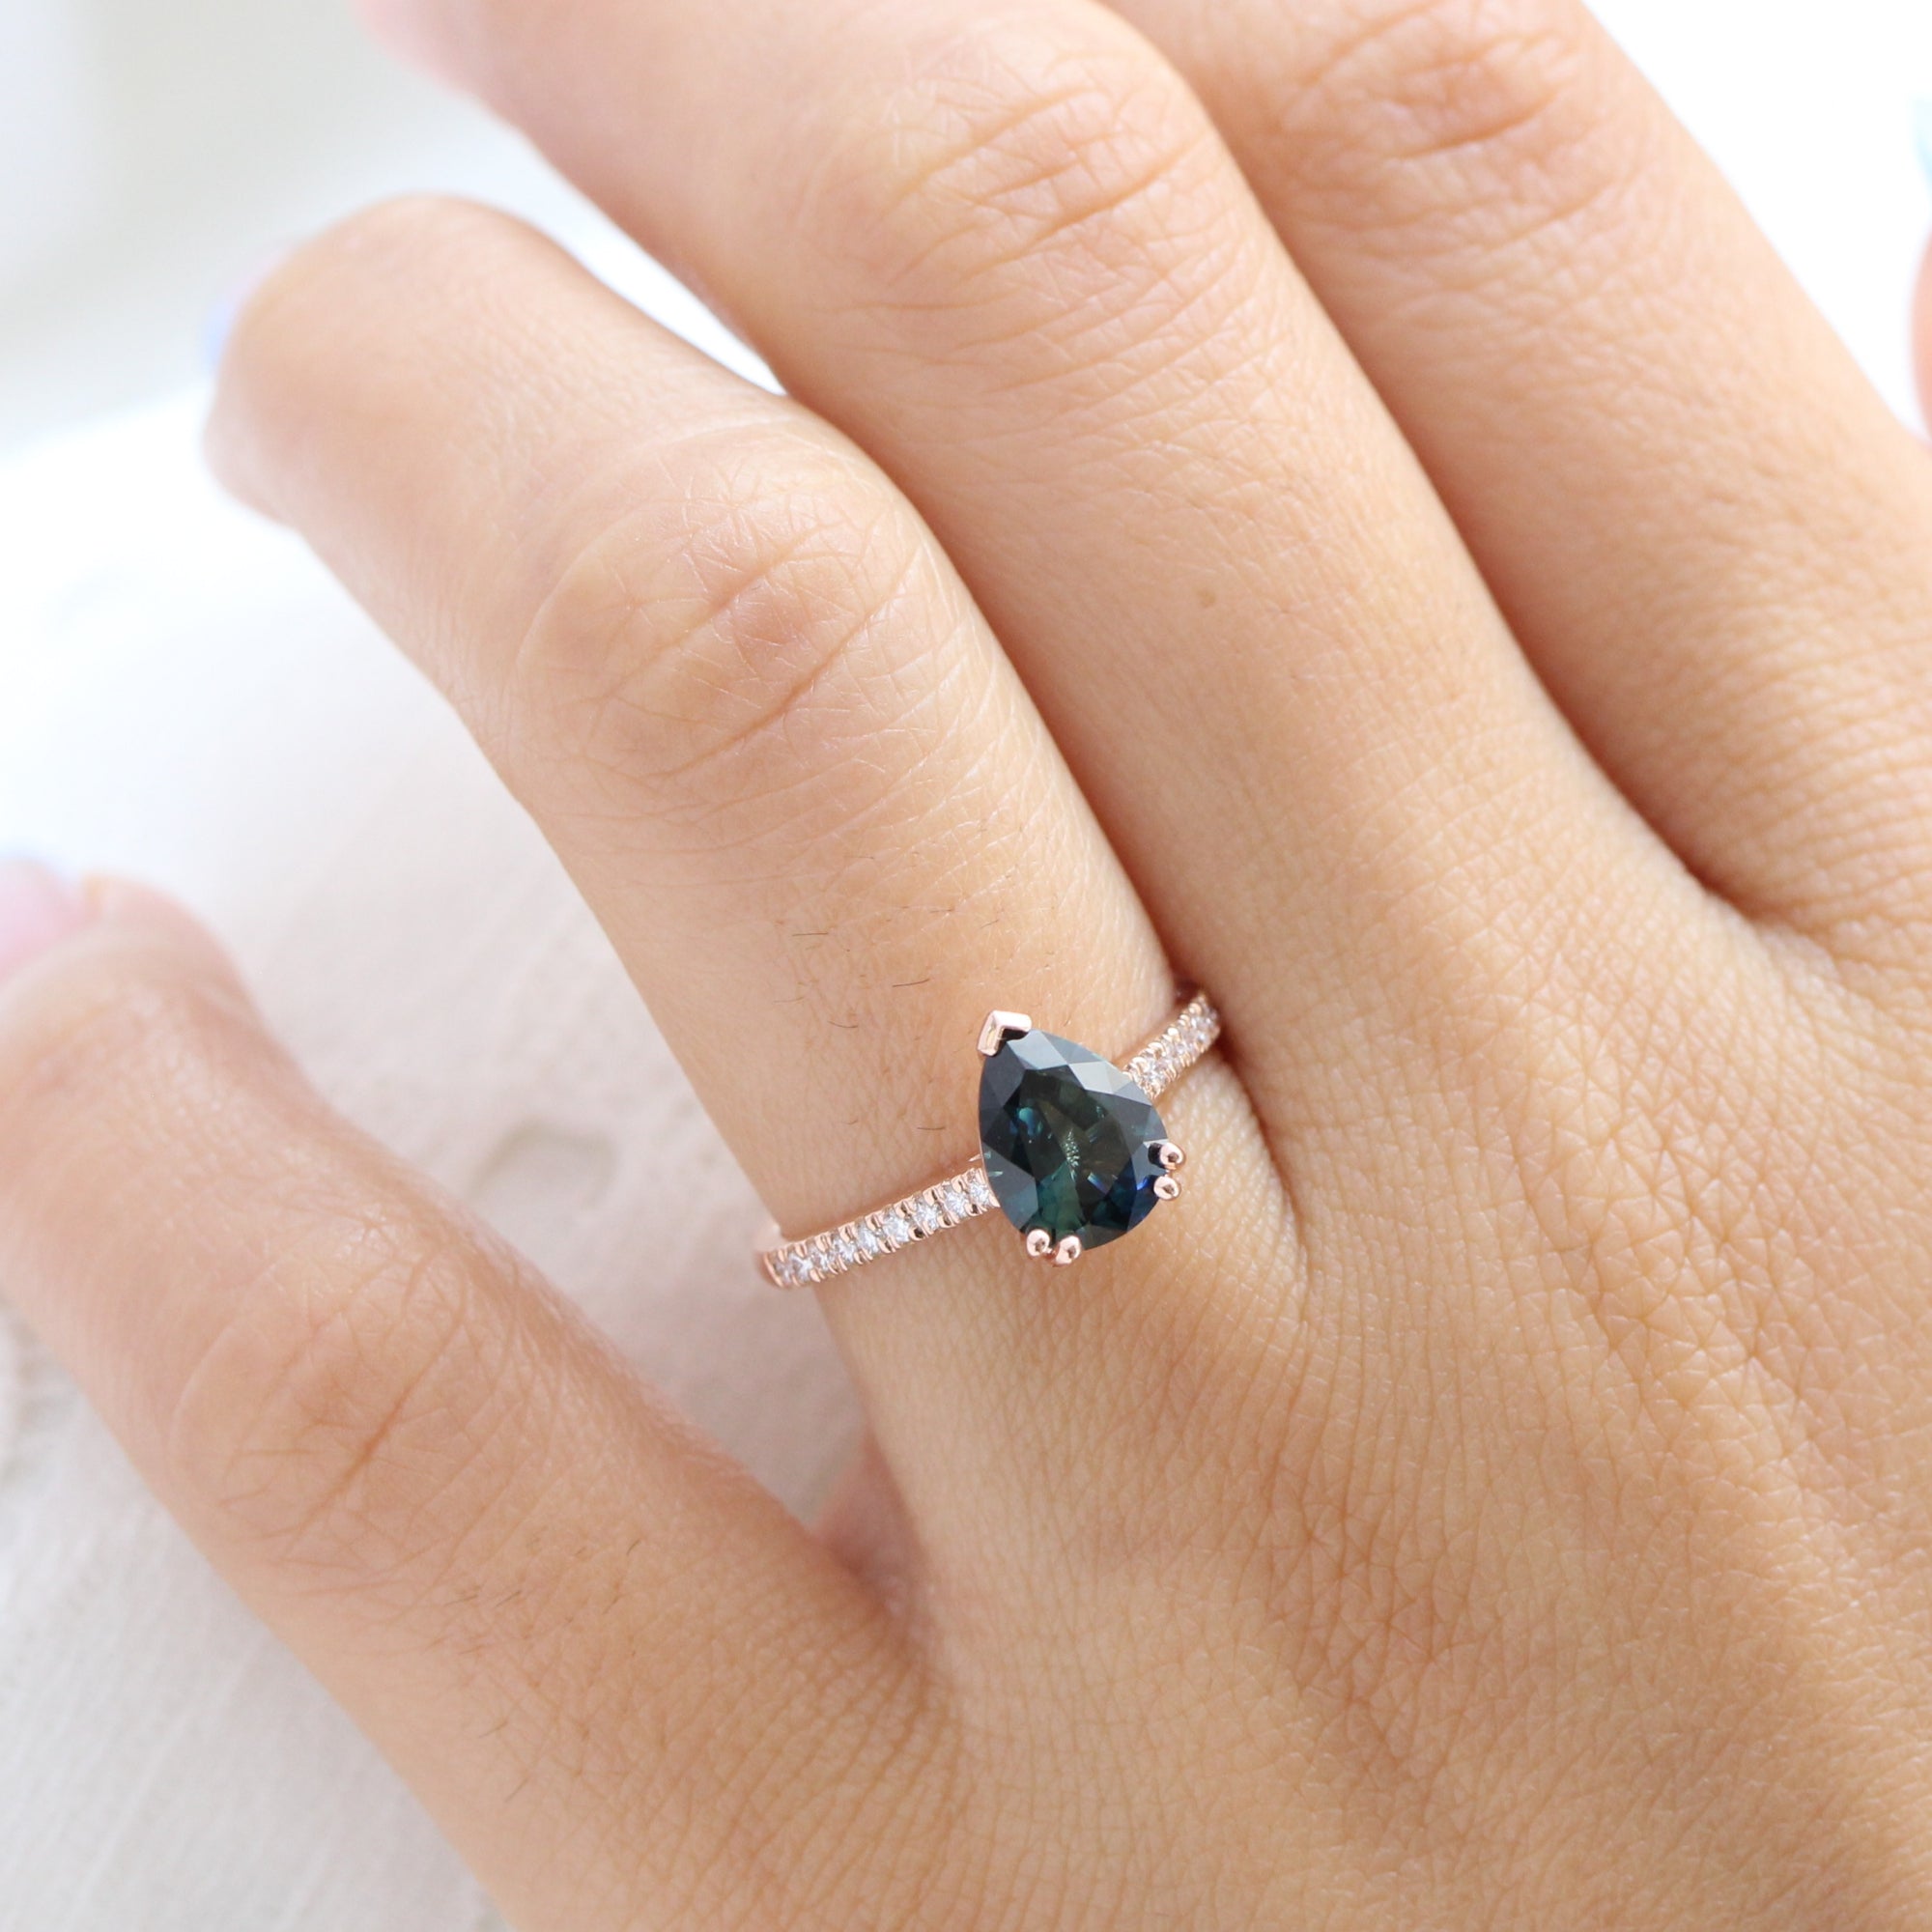 Solitaire pear teal green sapphire ring rose gold pave diamond band la more design jewelry